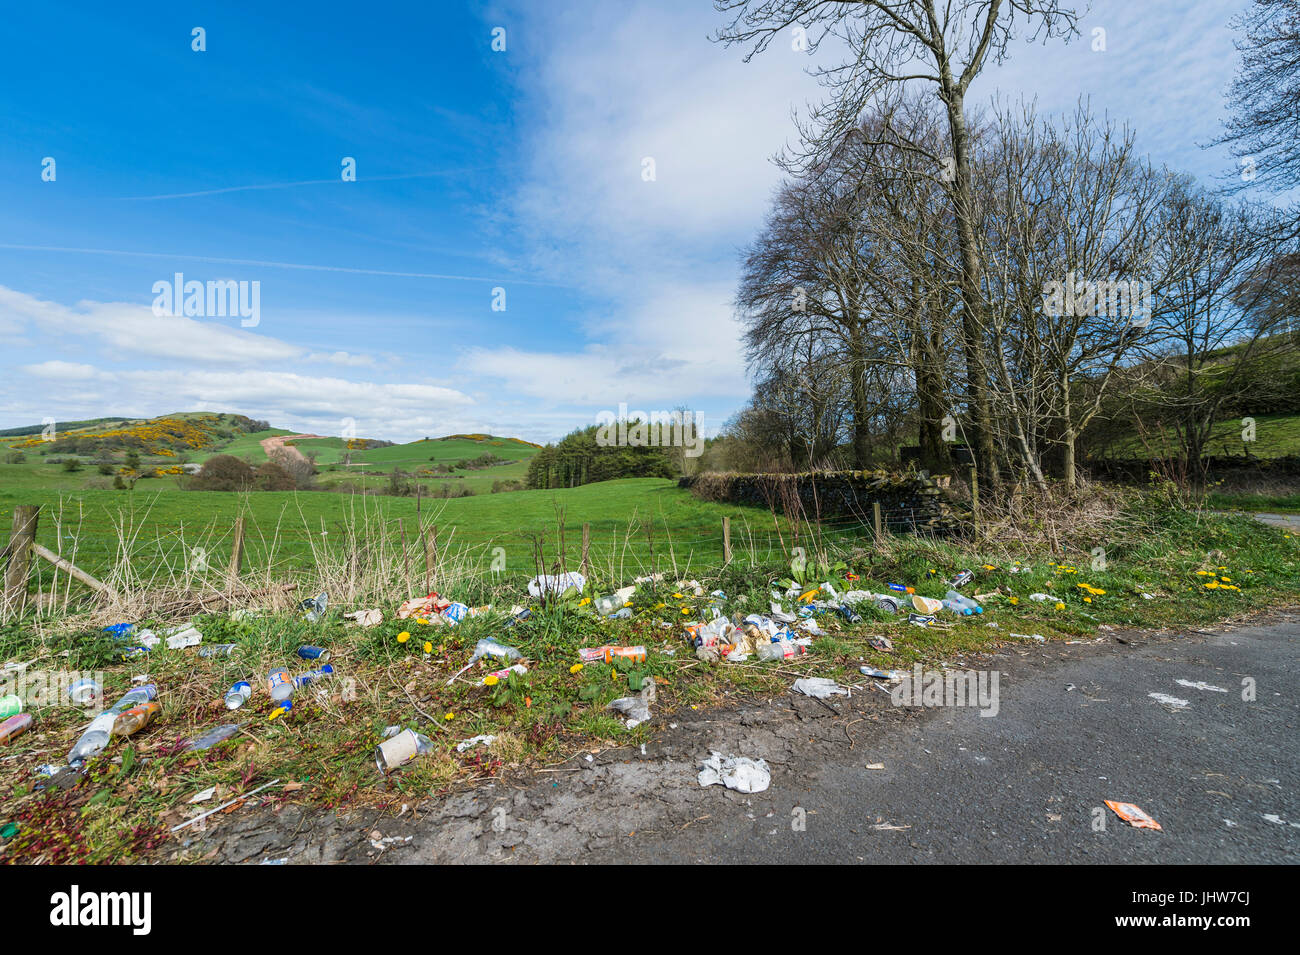 Dumfries, Scotland, UK - April 23, 2017: Discarded litter at the side of a rural road near Dumfries in Dumfries and Galloway, south west Scotland. Stock Photo